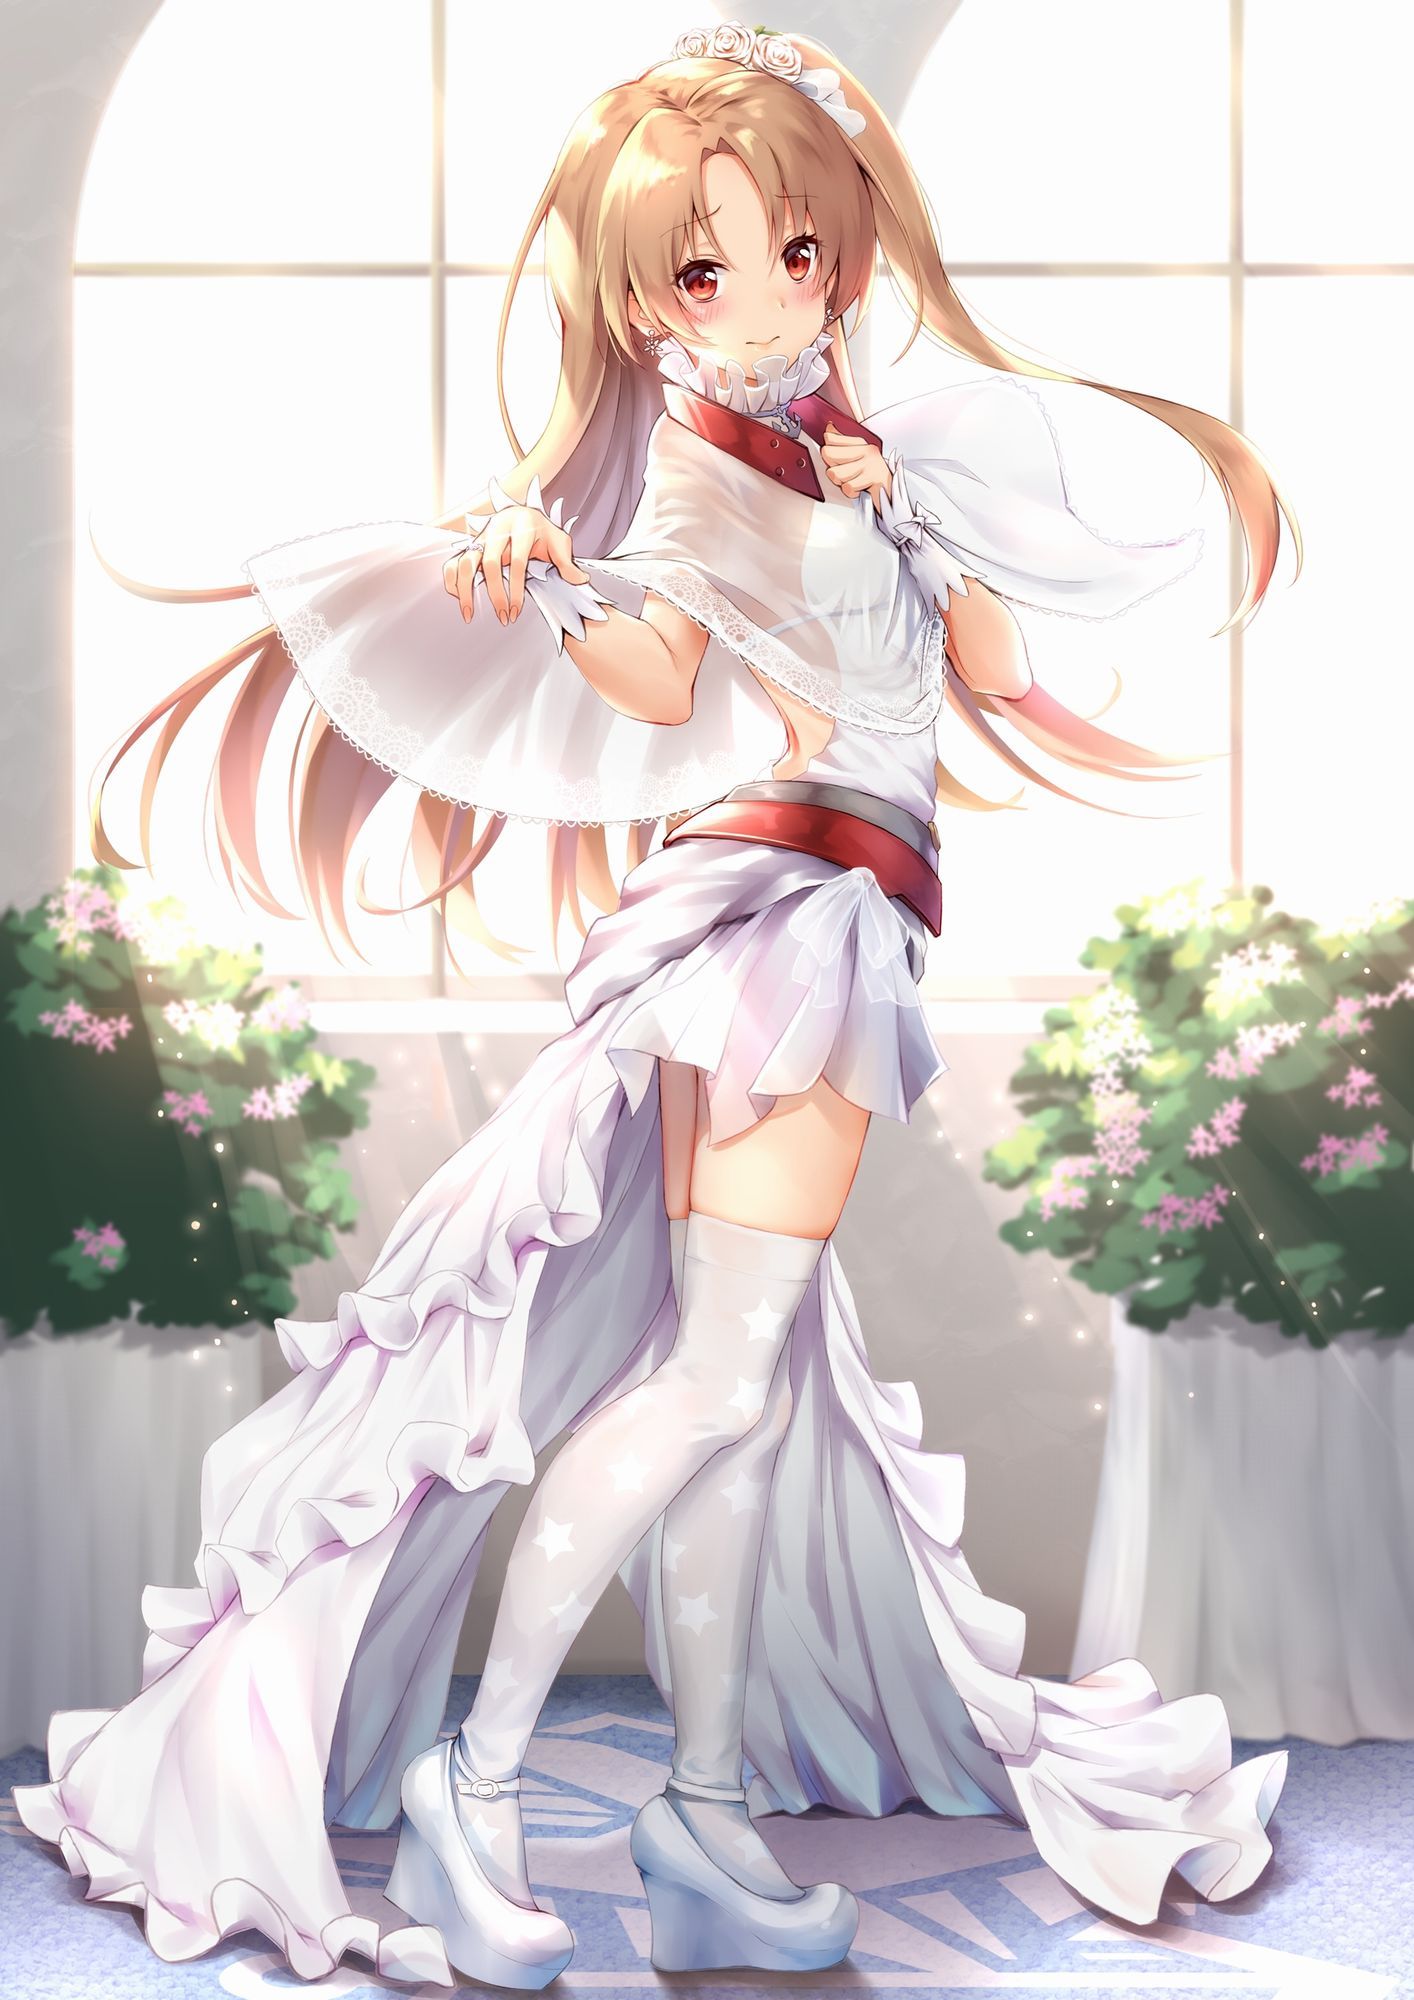 【Azur Lane】I will put cleveland's ero cute images together for free ☆ 16